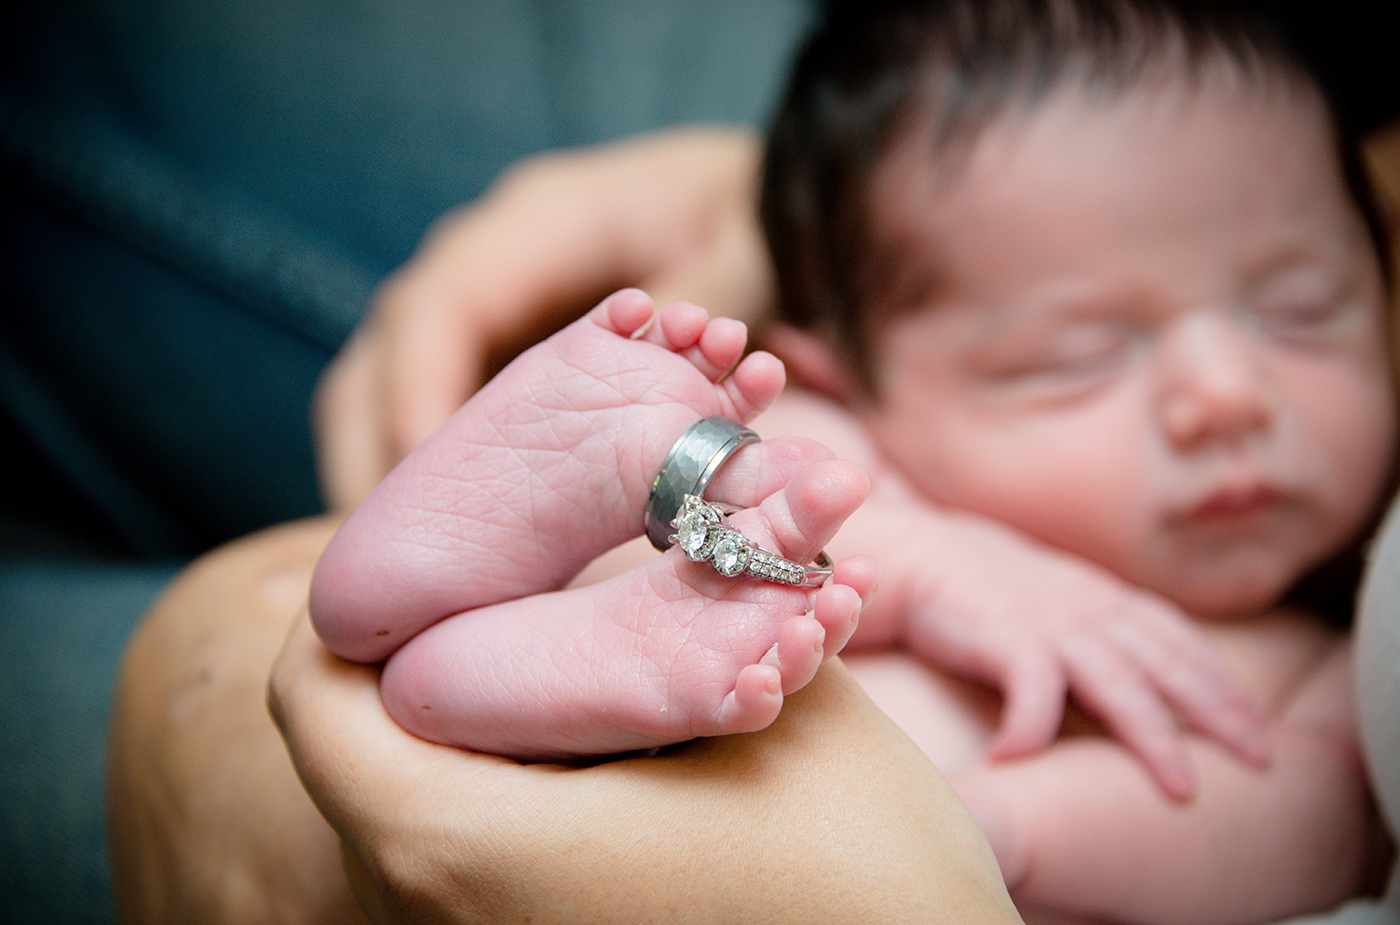 All Occasions Photography Albany NY - Newborn Photography Infant Holding Parent's Wedding Rings on Toes